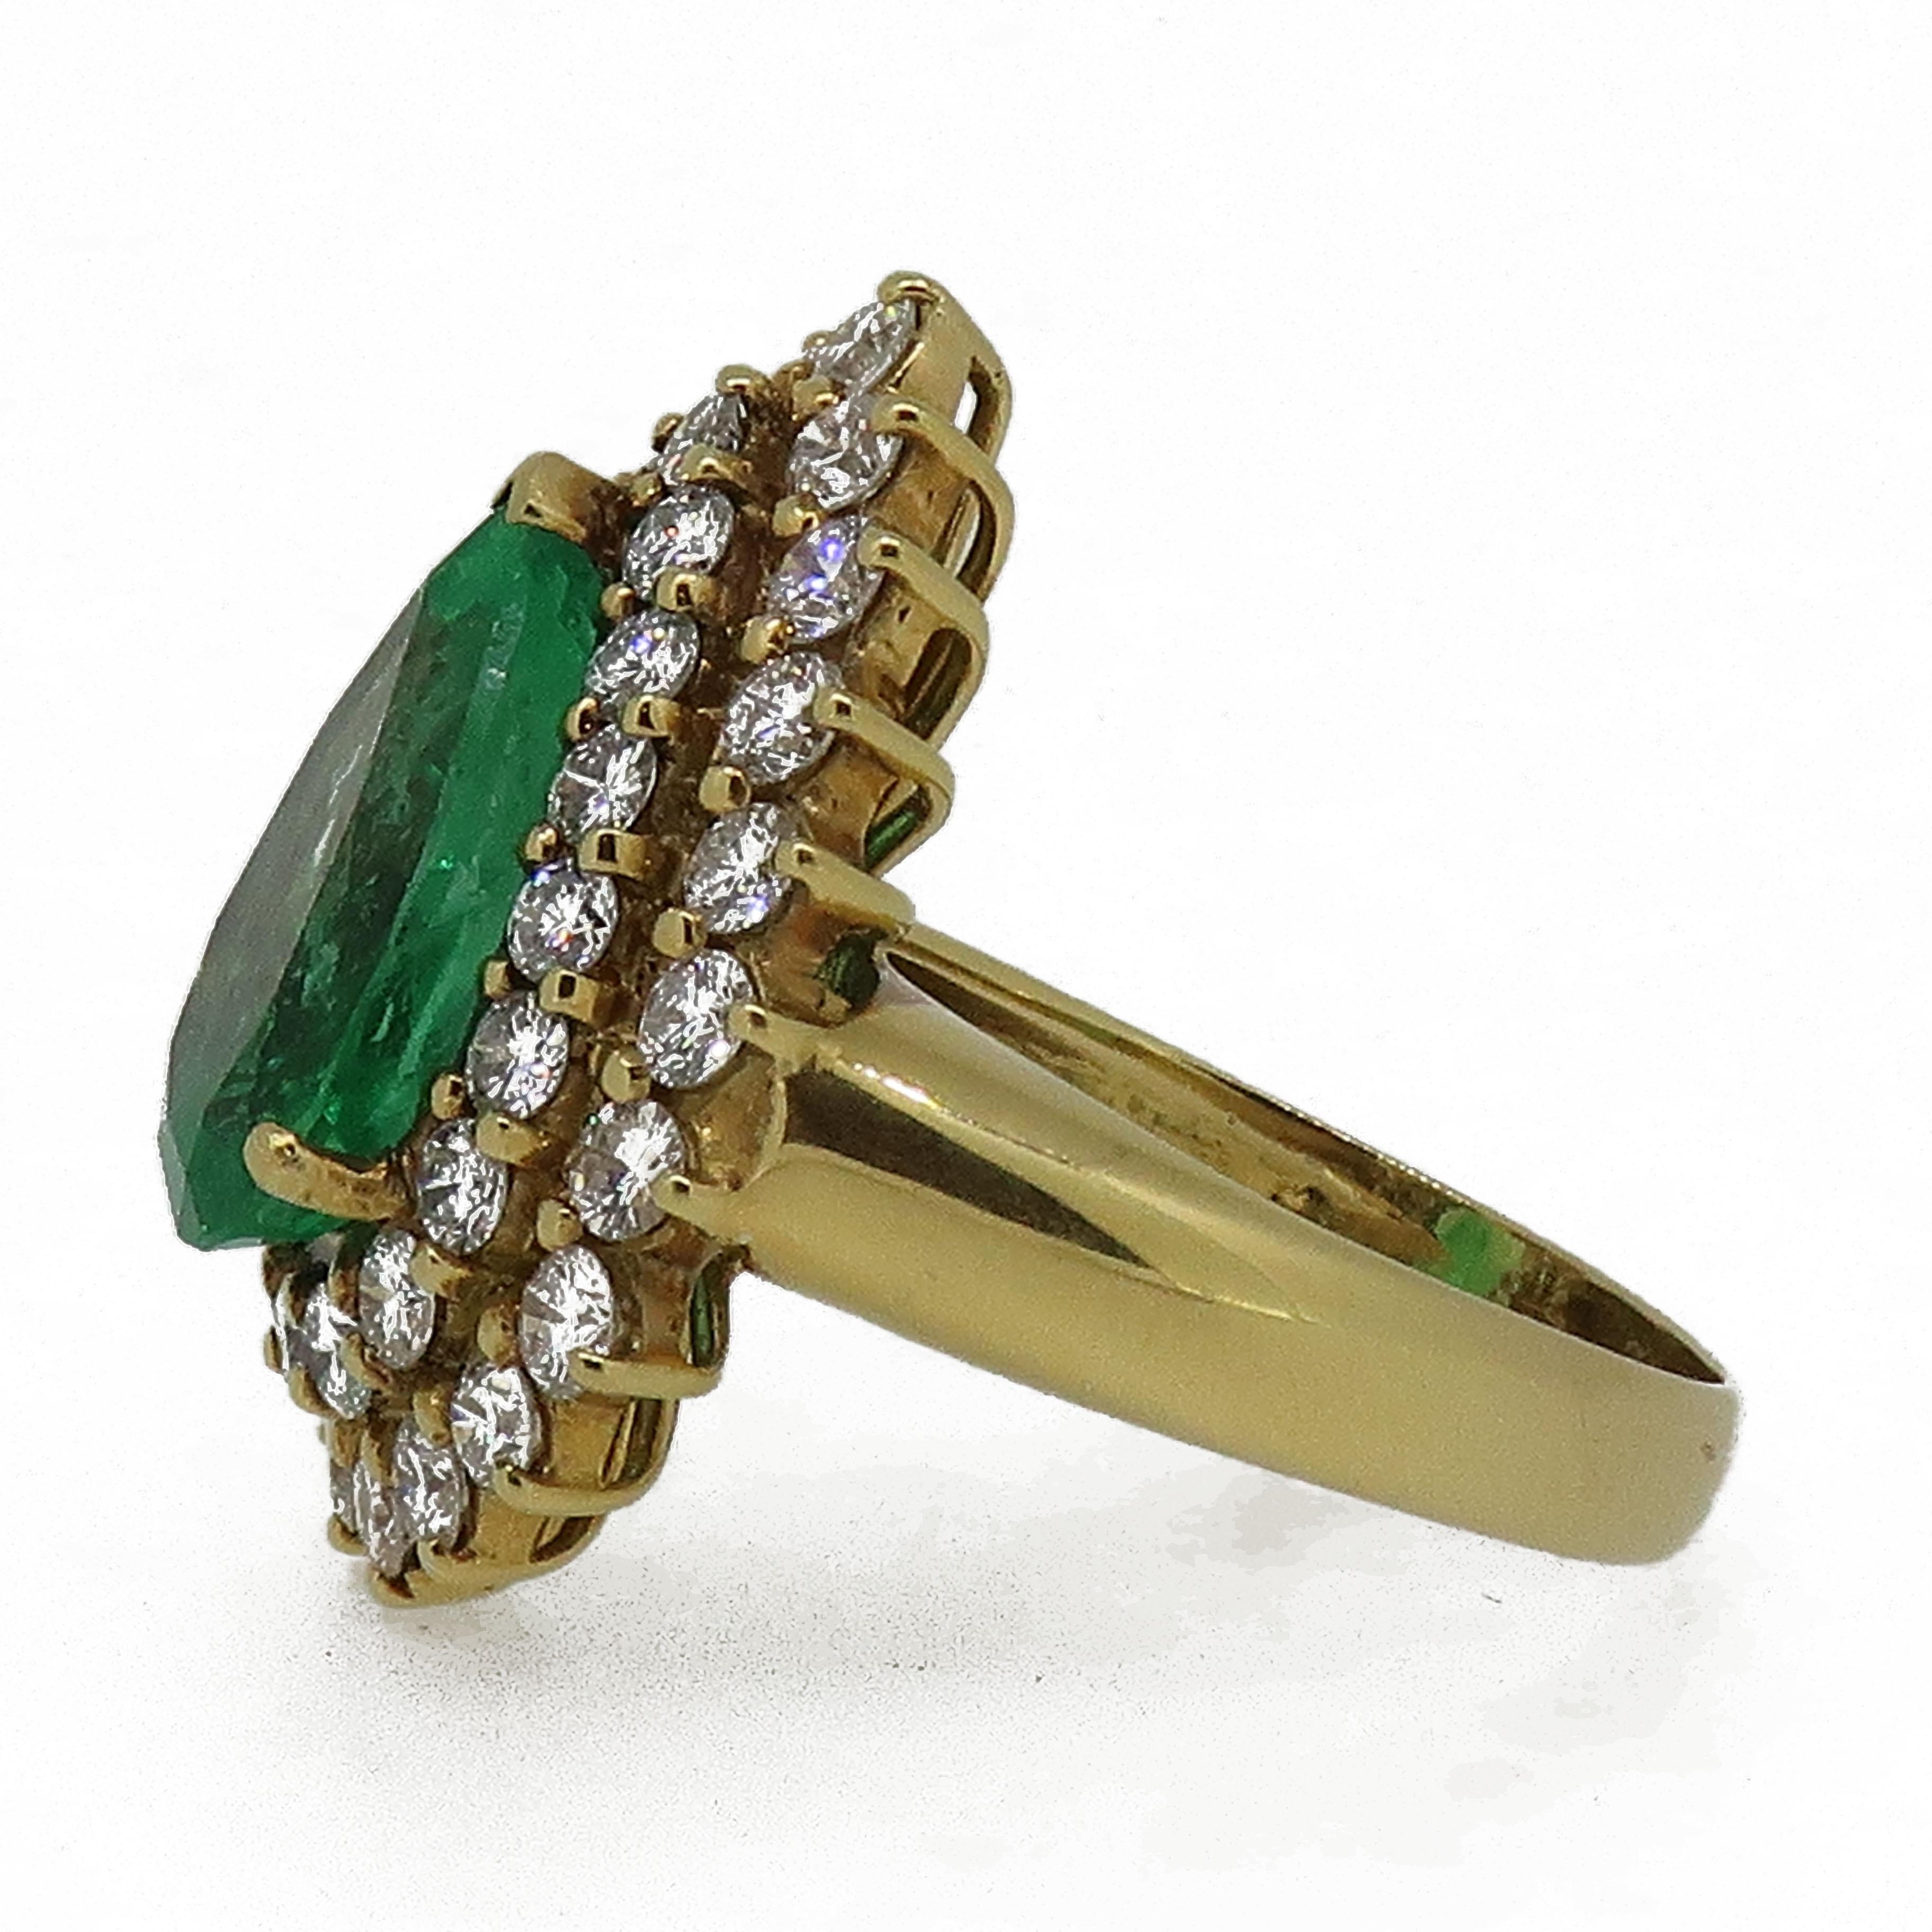 Pear Shape Emerald & Diamond Cluster Ring Yellow Gold

A truly mesmerising pear shape Columbian emerald, surrounded by two rows of  white brilliant cut diamonds all in a claw setting. 
The pear shape emerald measures a whopping 14.2 x 9.6mm, the